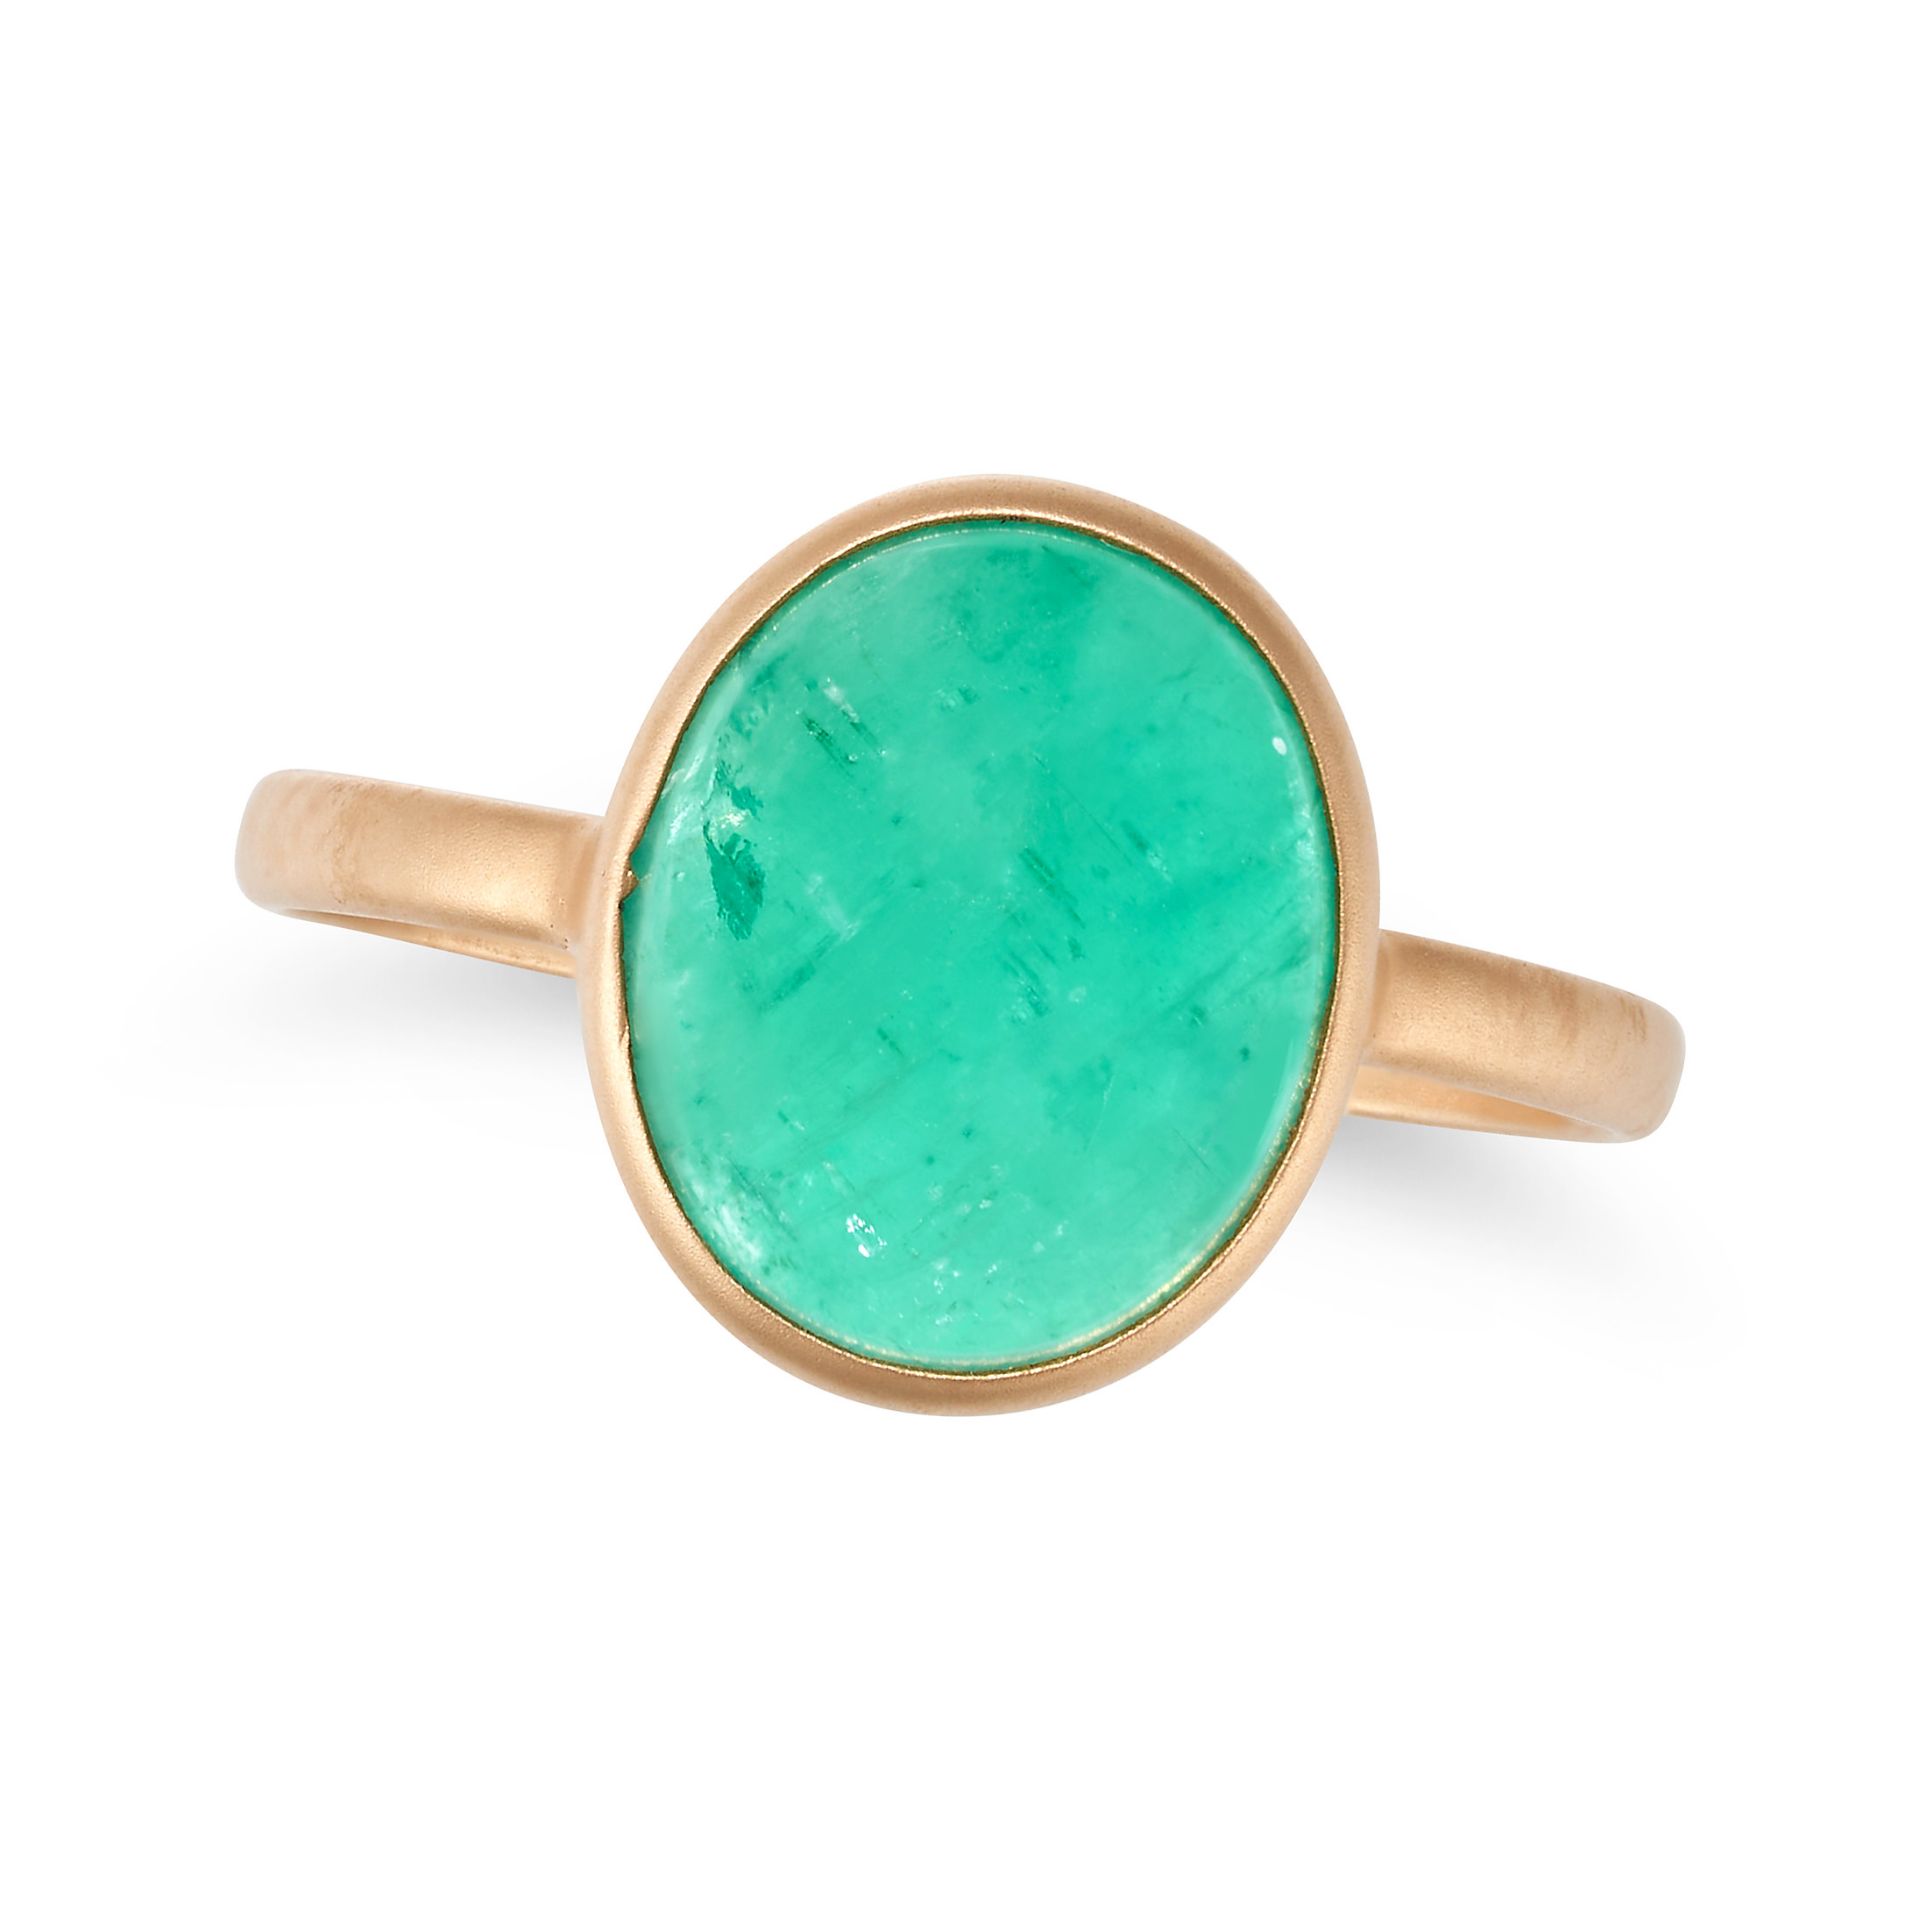 AN EMERALD RING in 18ct yellow gold, set with a cabochon emerald on a satin finish band, stamped ...